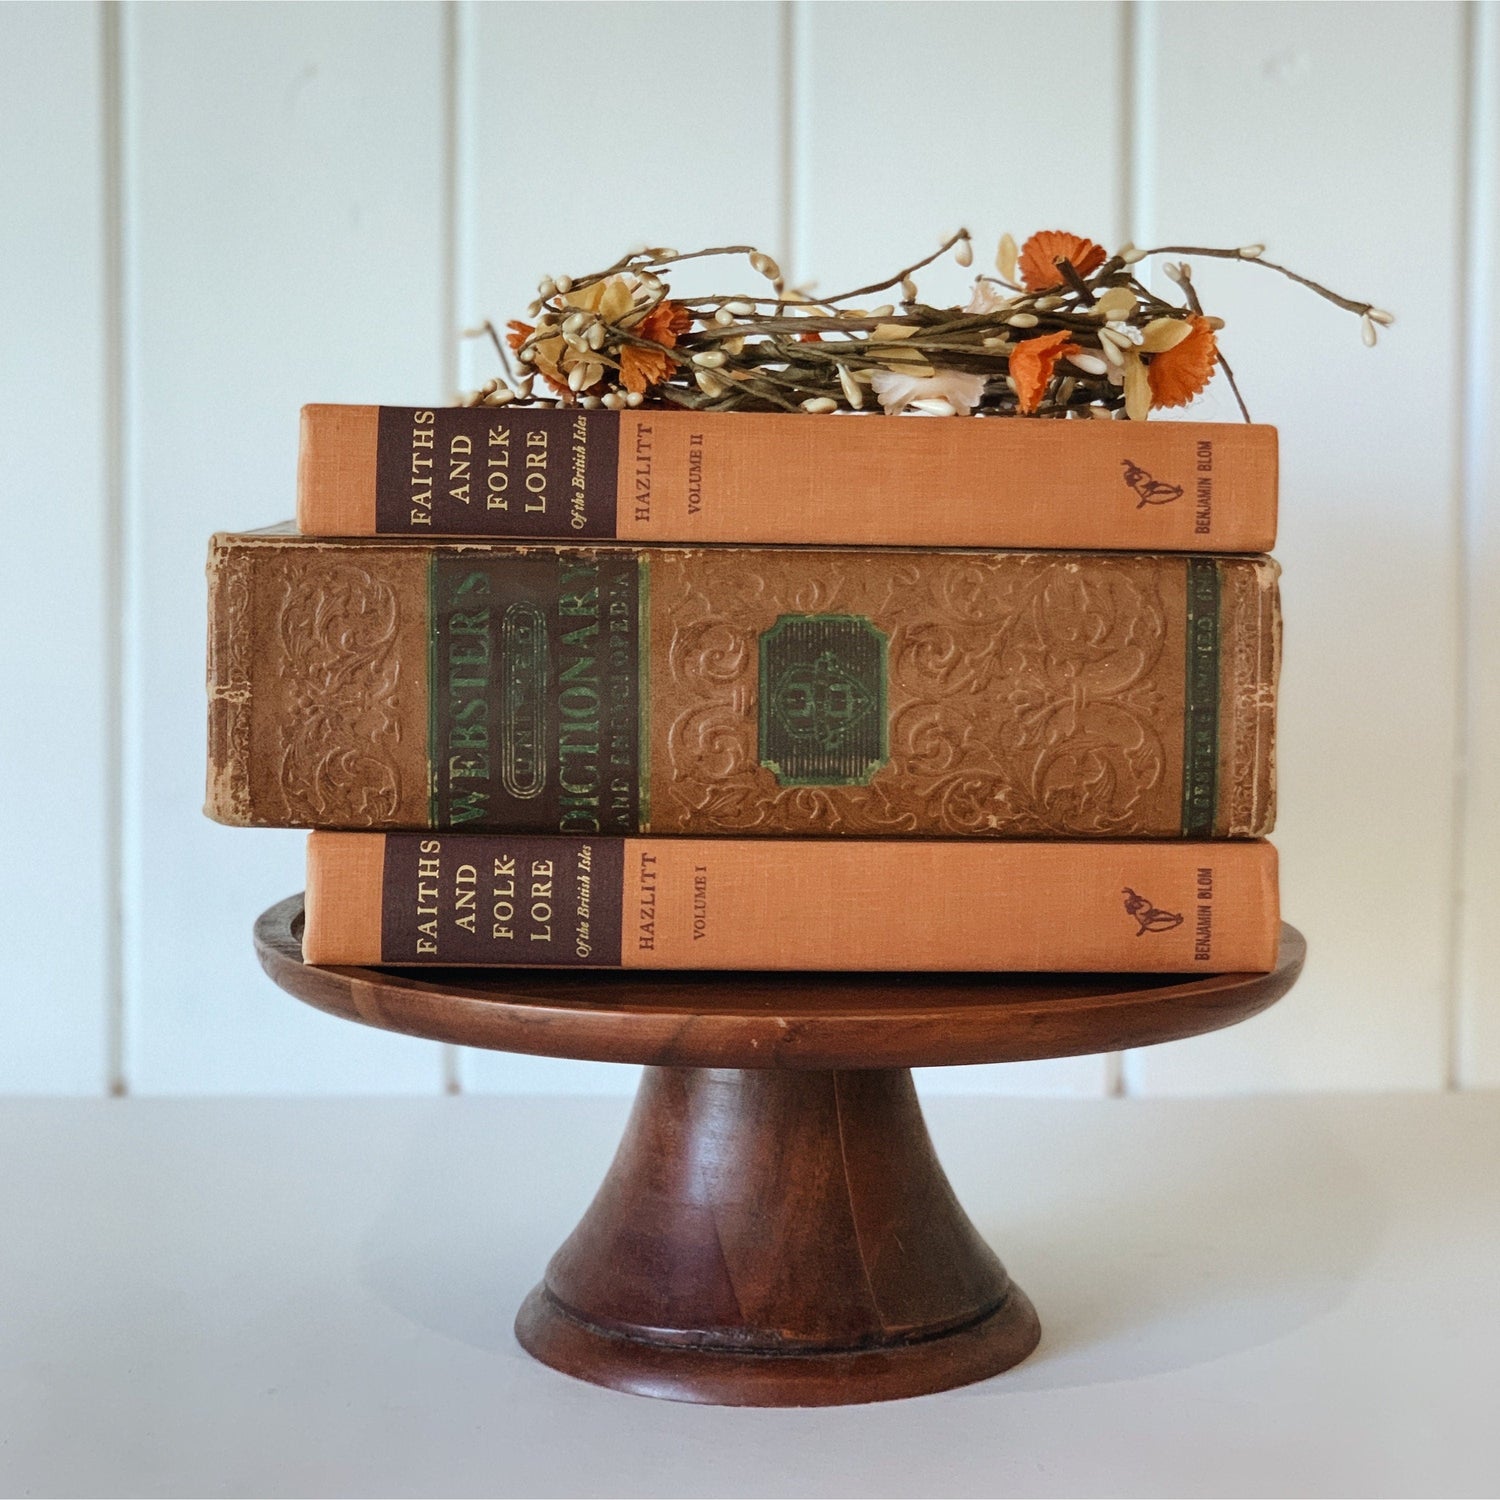 Oversized Vintage Reference Books for Decor, Brown and Copper Retro Books